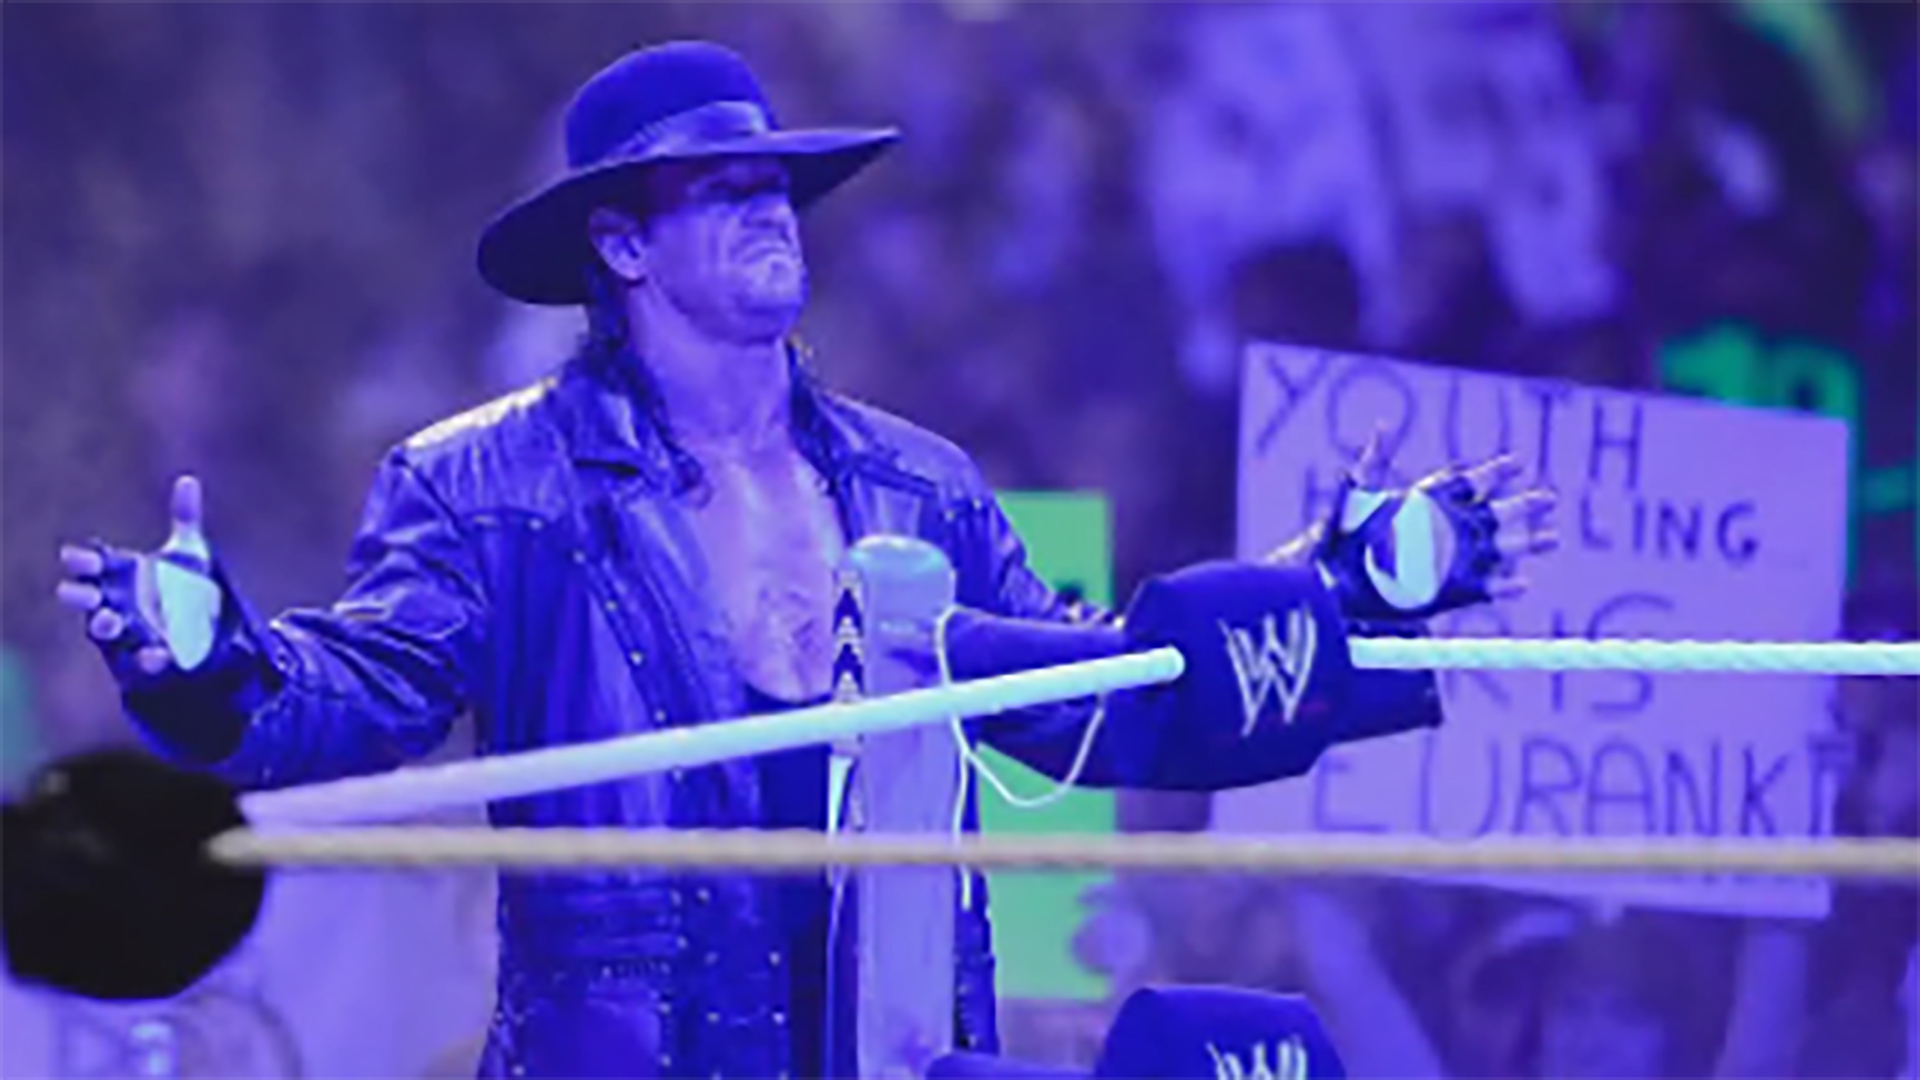 Wrestling icon The Undertaker to be inducted into World Wresting Entertainment hall of fame